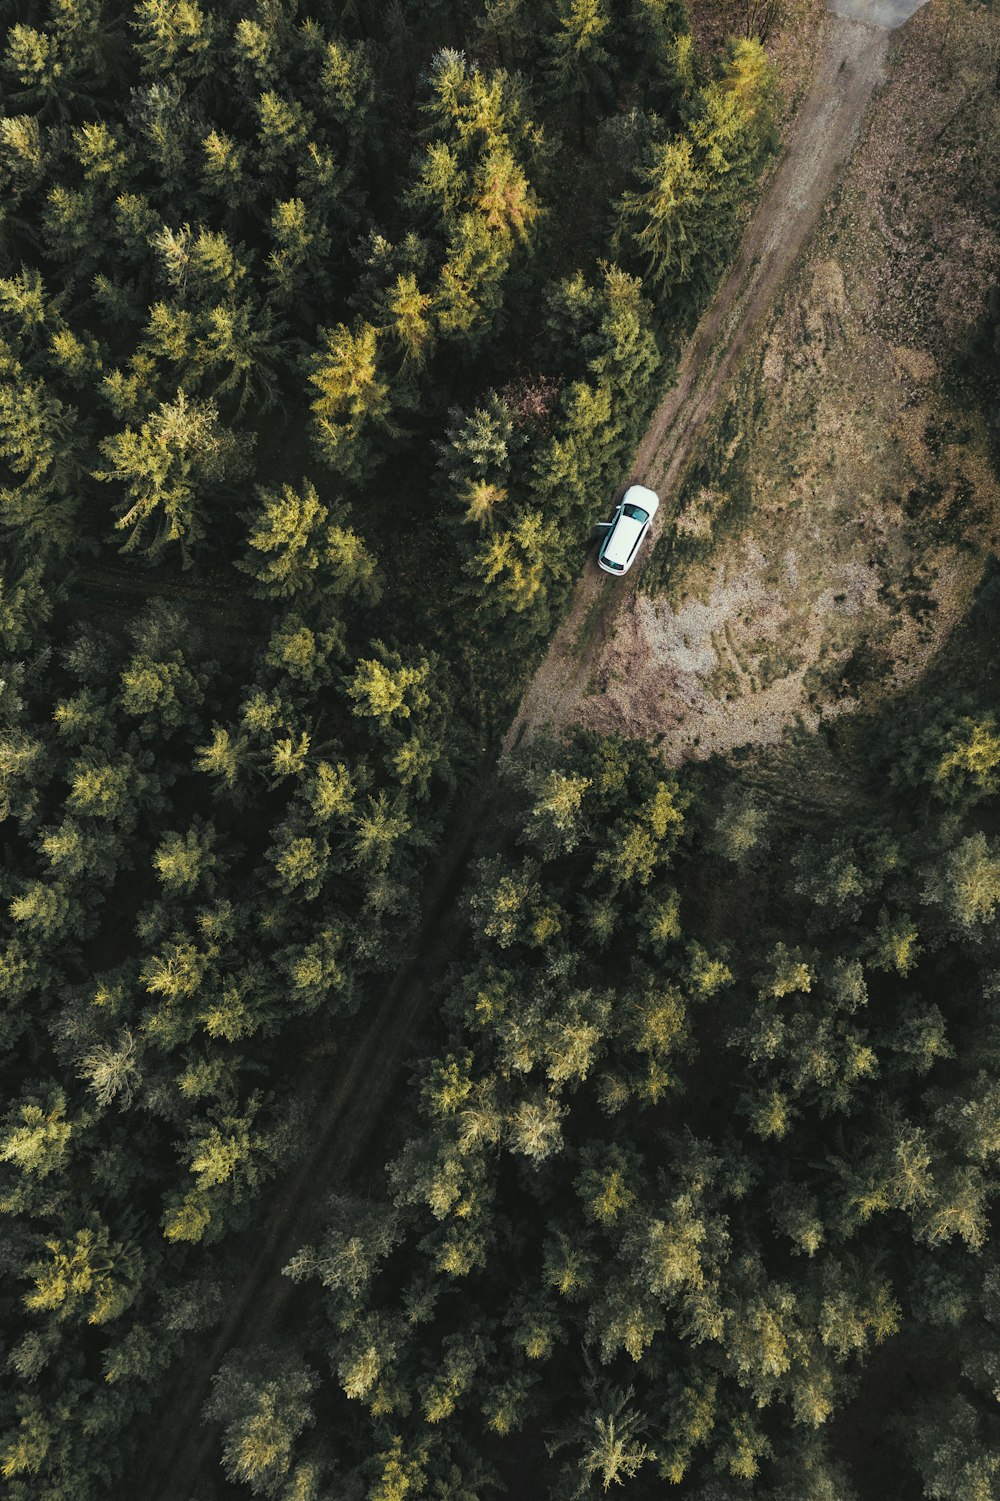 bird's-eye view photography of white car in forest